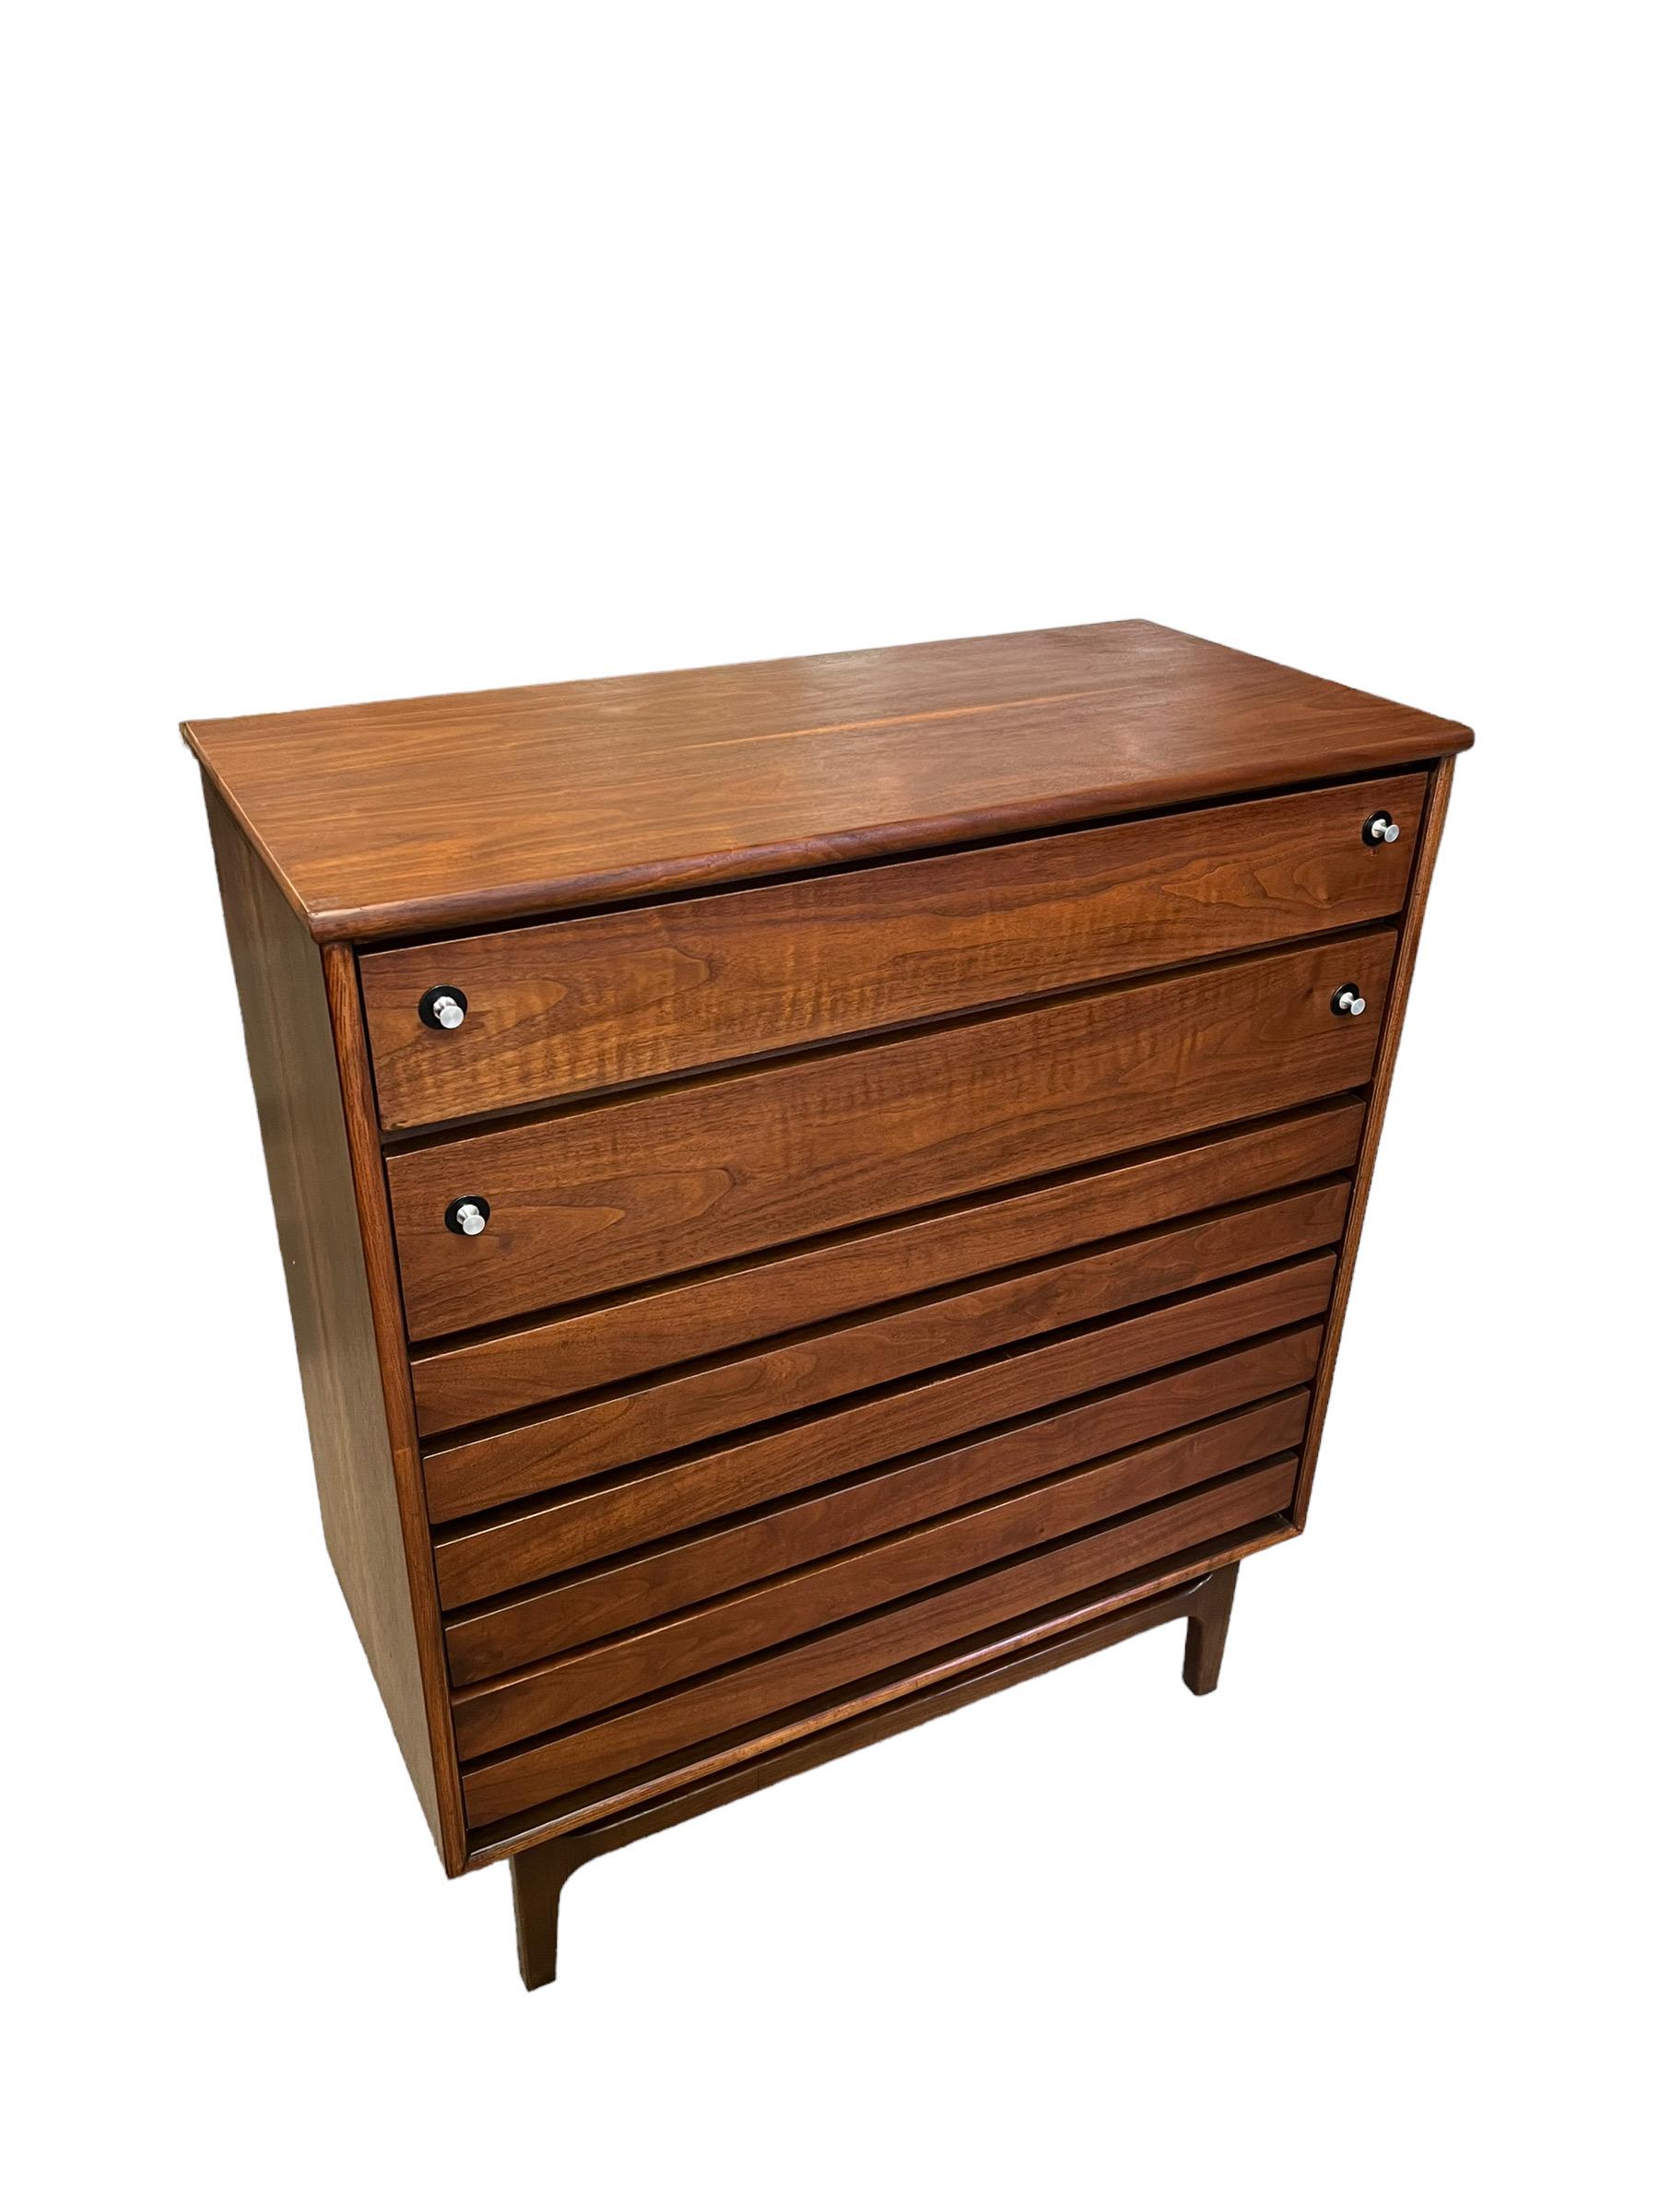 Vintage Mid Century Modern 5 Drawer Dresser by Stanley Dovetail Drawers In Good Condition For Sale In Seattle, WA